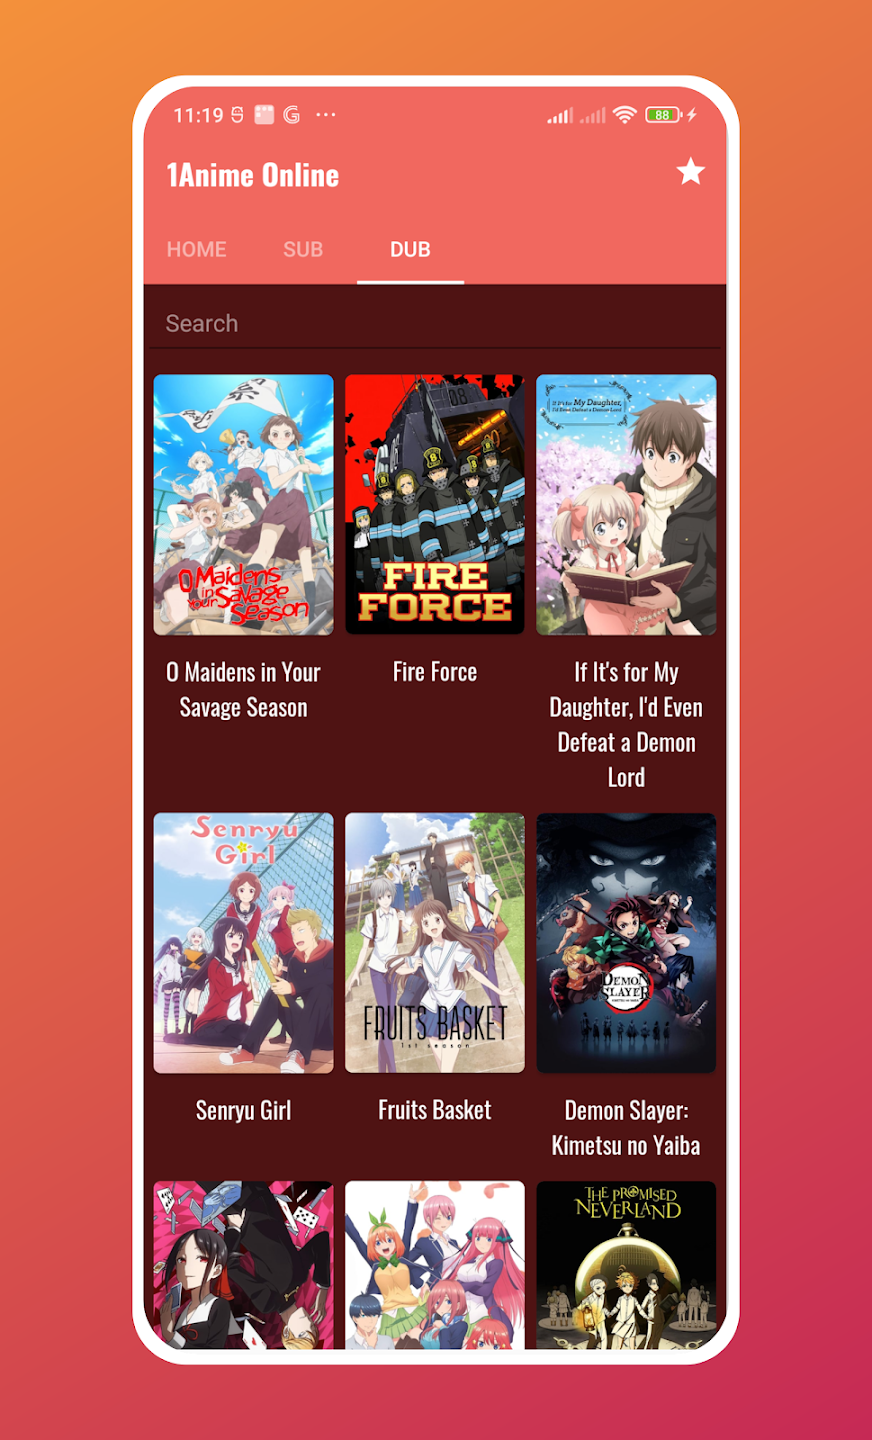 Download Anime TV - Watch Anime HD MOD APK v1.2 for Android